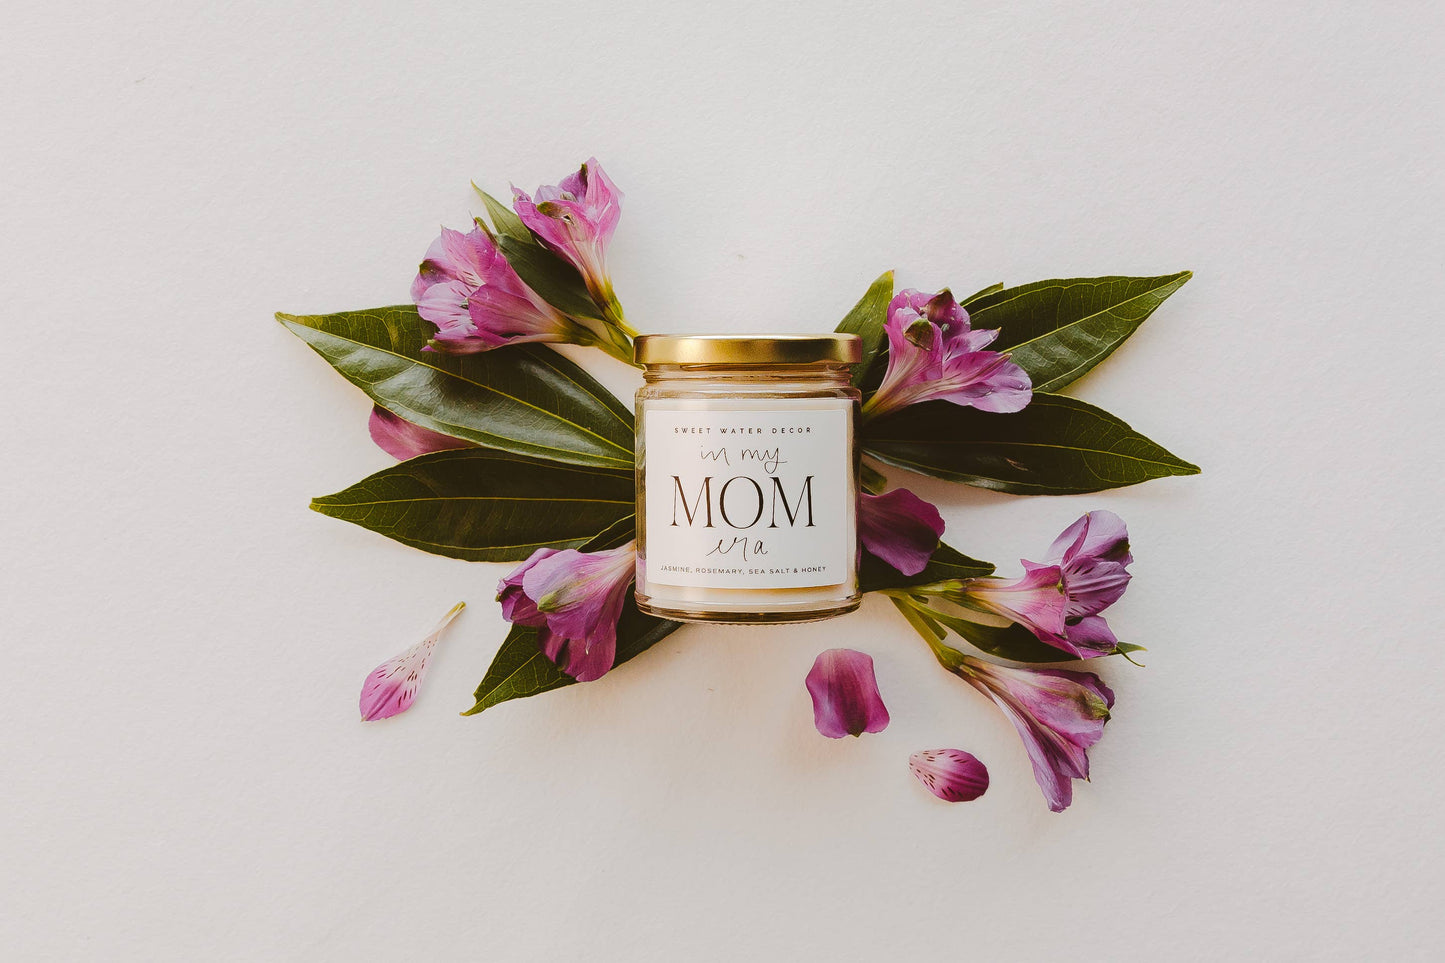 Sweet Water Decor - "In My Mom Era" Soy Candle